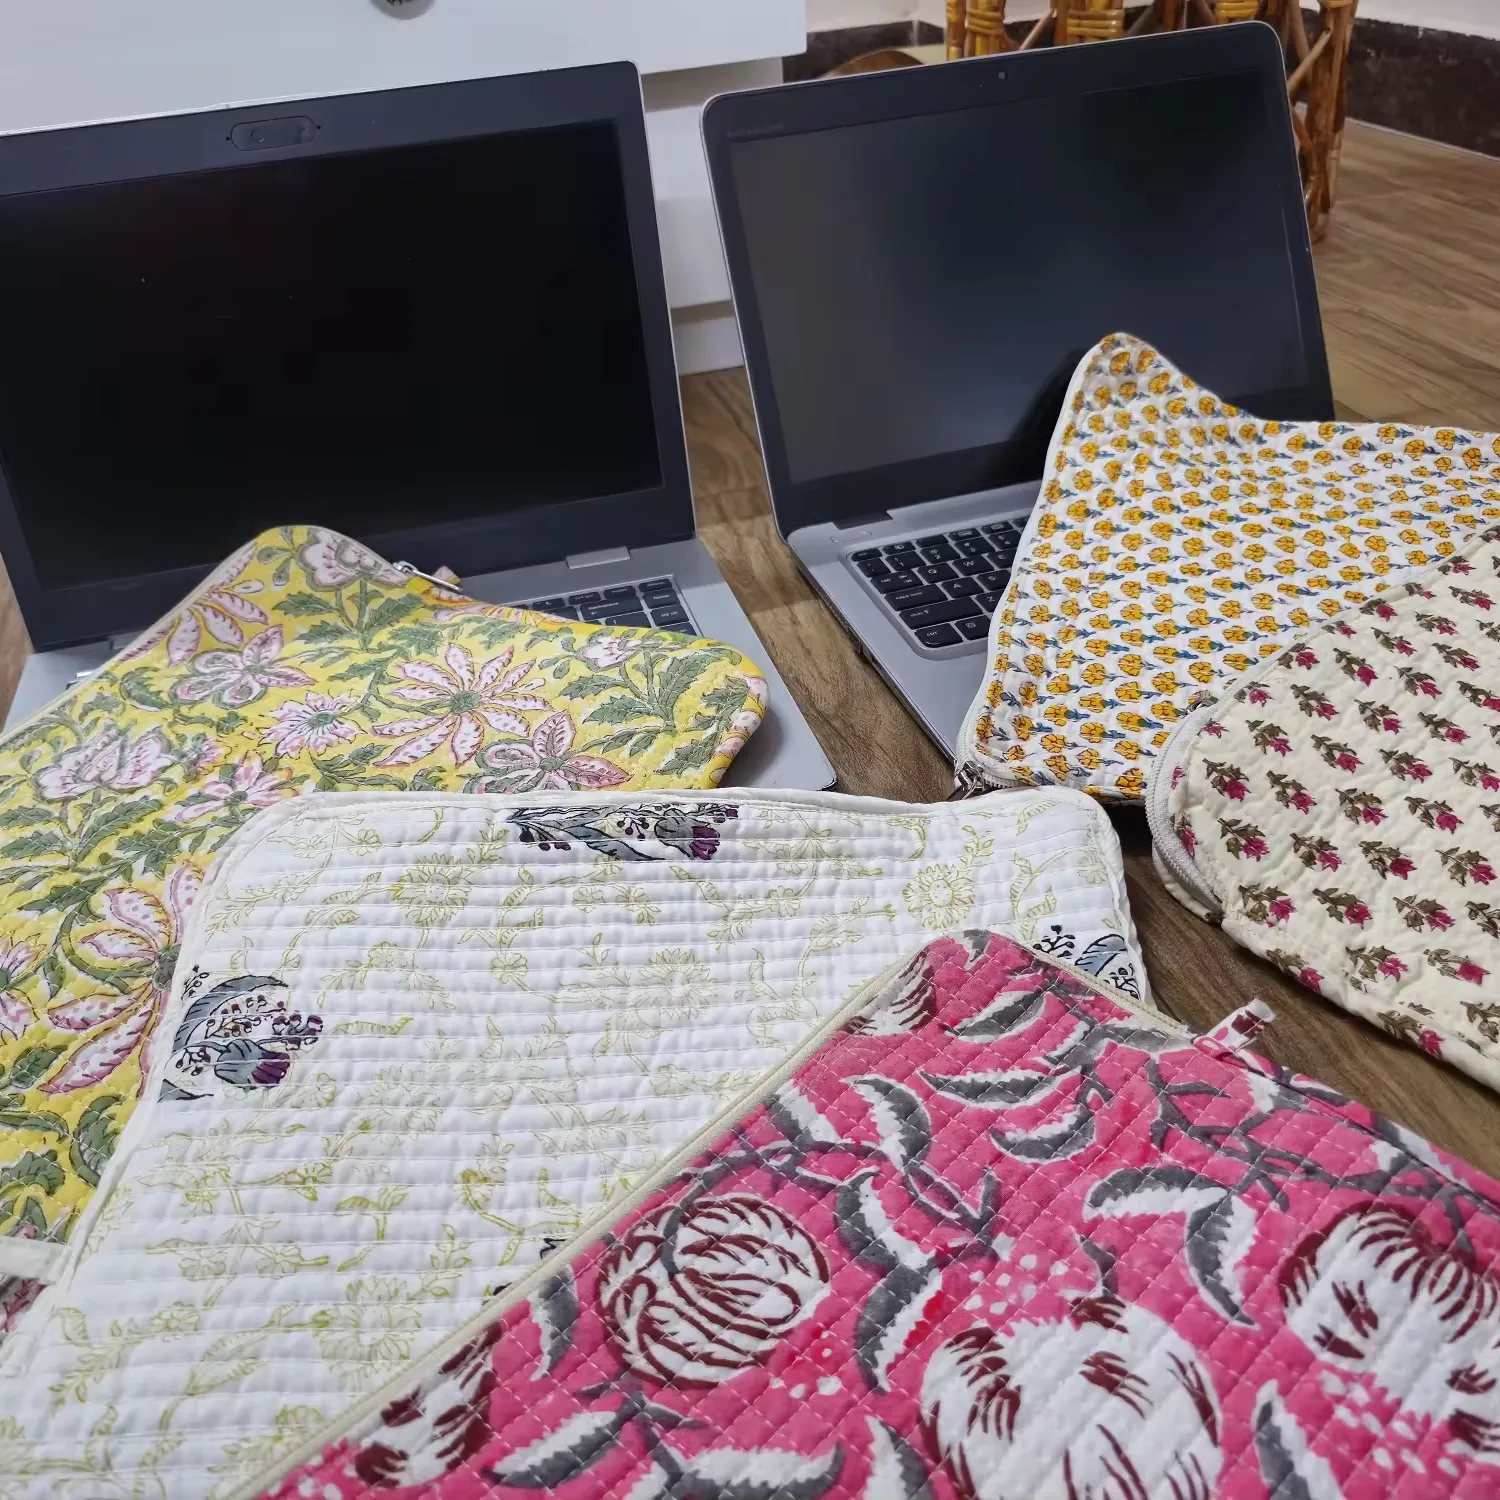 Wholesale Price Block Printed Cotton Quilted Laptop Sleeve MacBook Case For Tablet Pro Handmade Laptop Case Laptop Cover